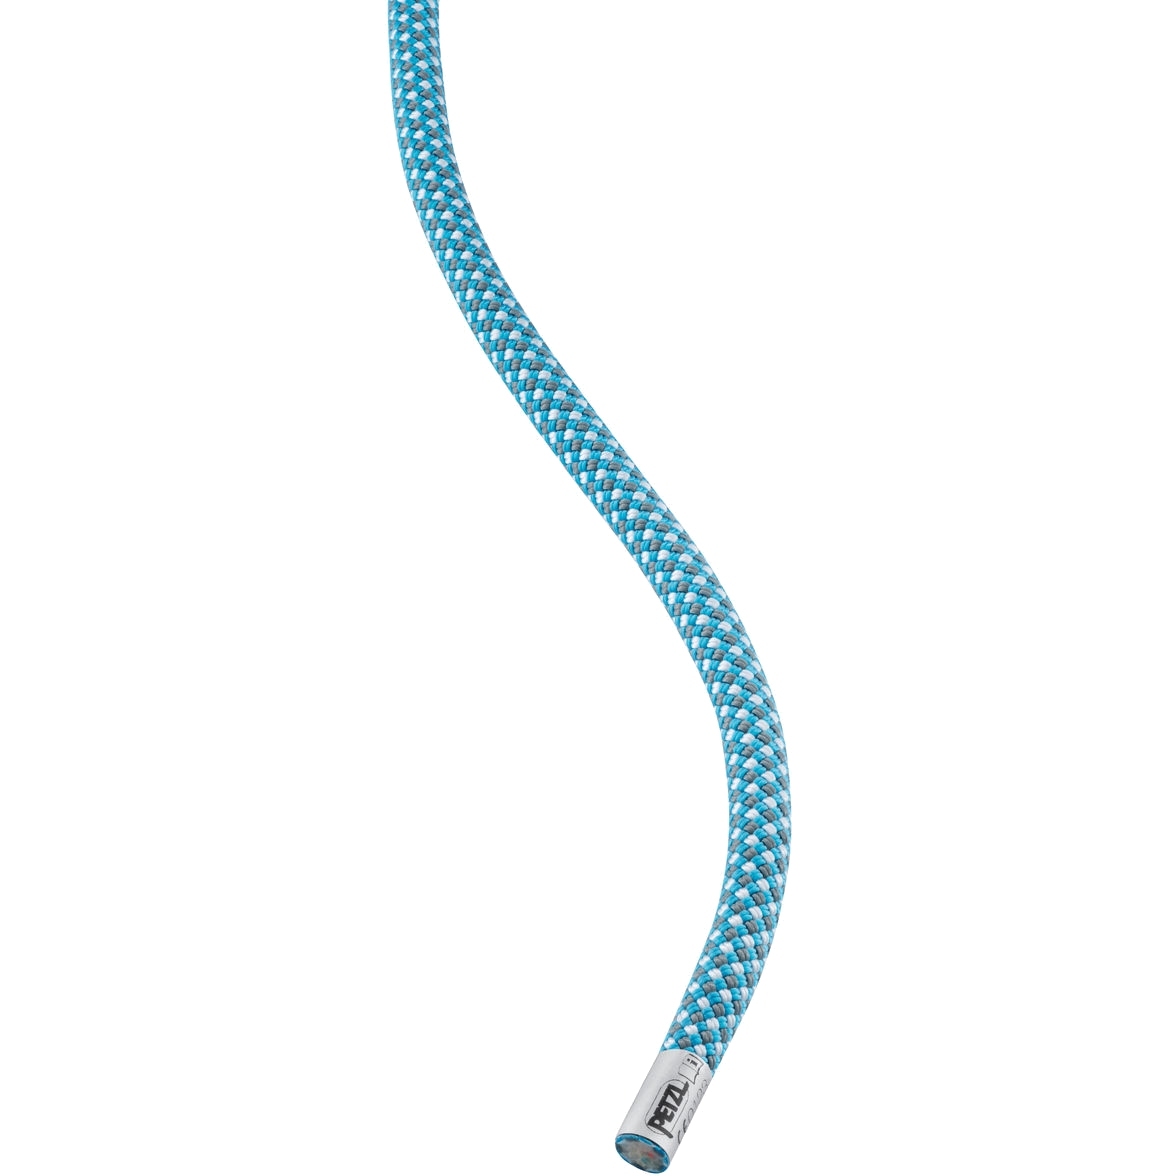 Picture of Petzl Mambo 10.1mm Rope - 50m - turquoise